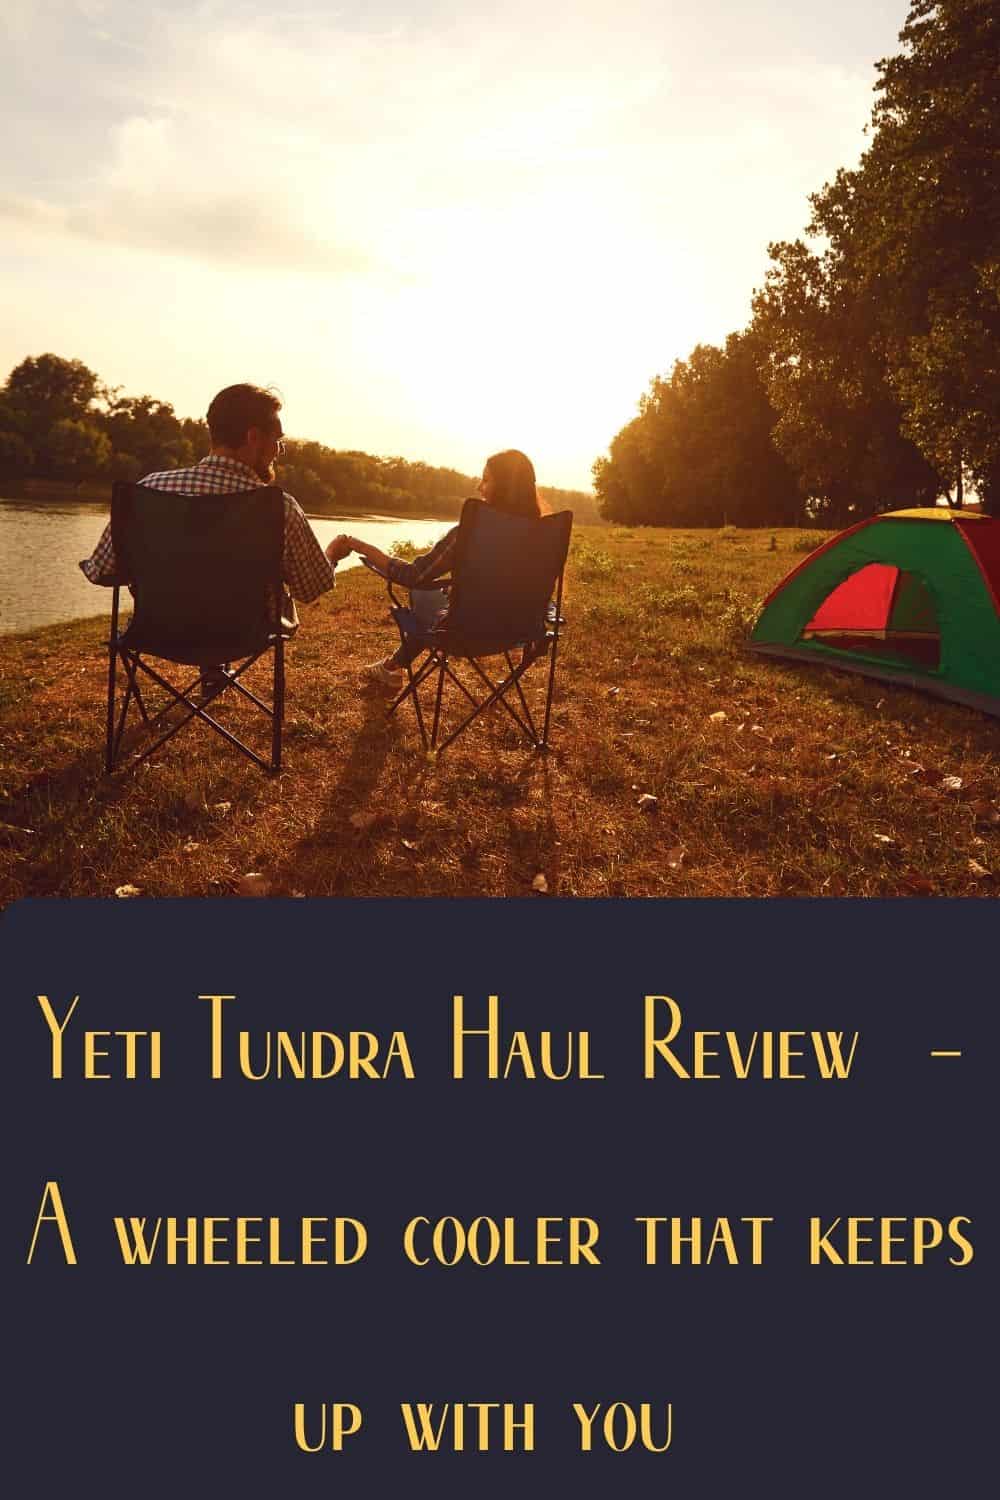 Pinterest image for Yeti Tundra Haul Review - A wheeled cooler that keeps up with you